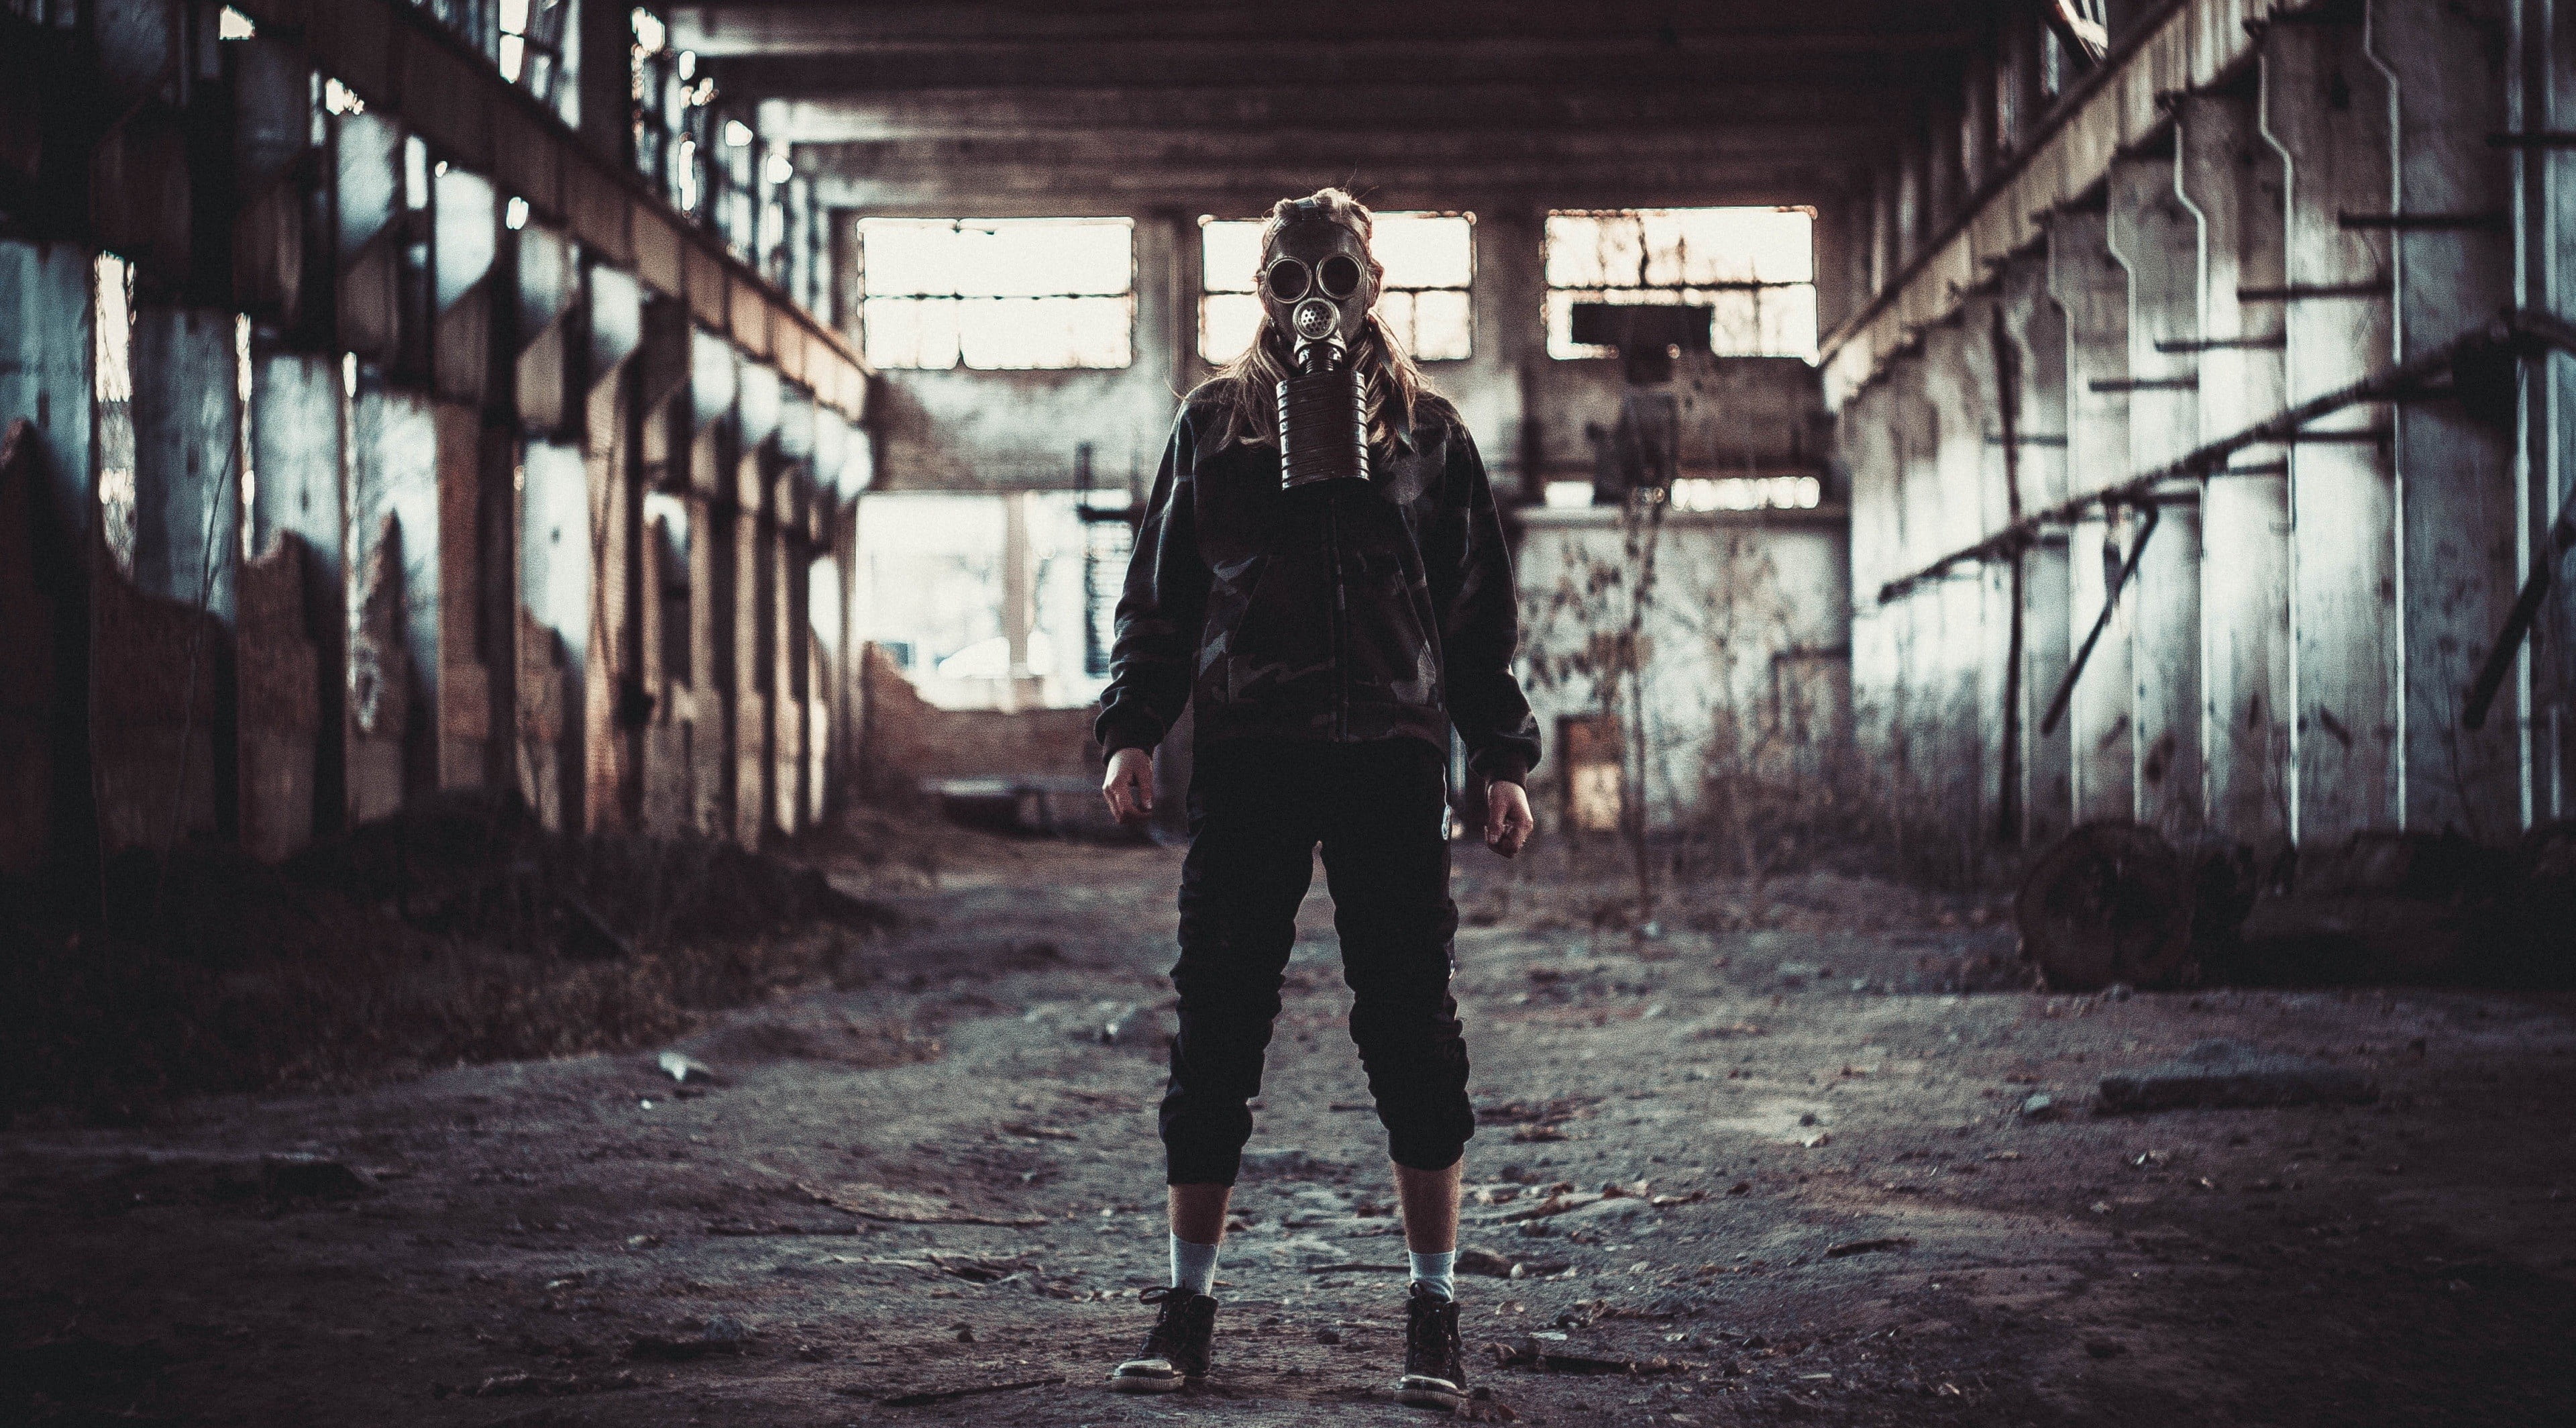 black leather jacket, gas masks, one person, architecture, full length